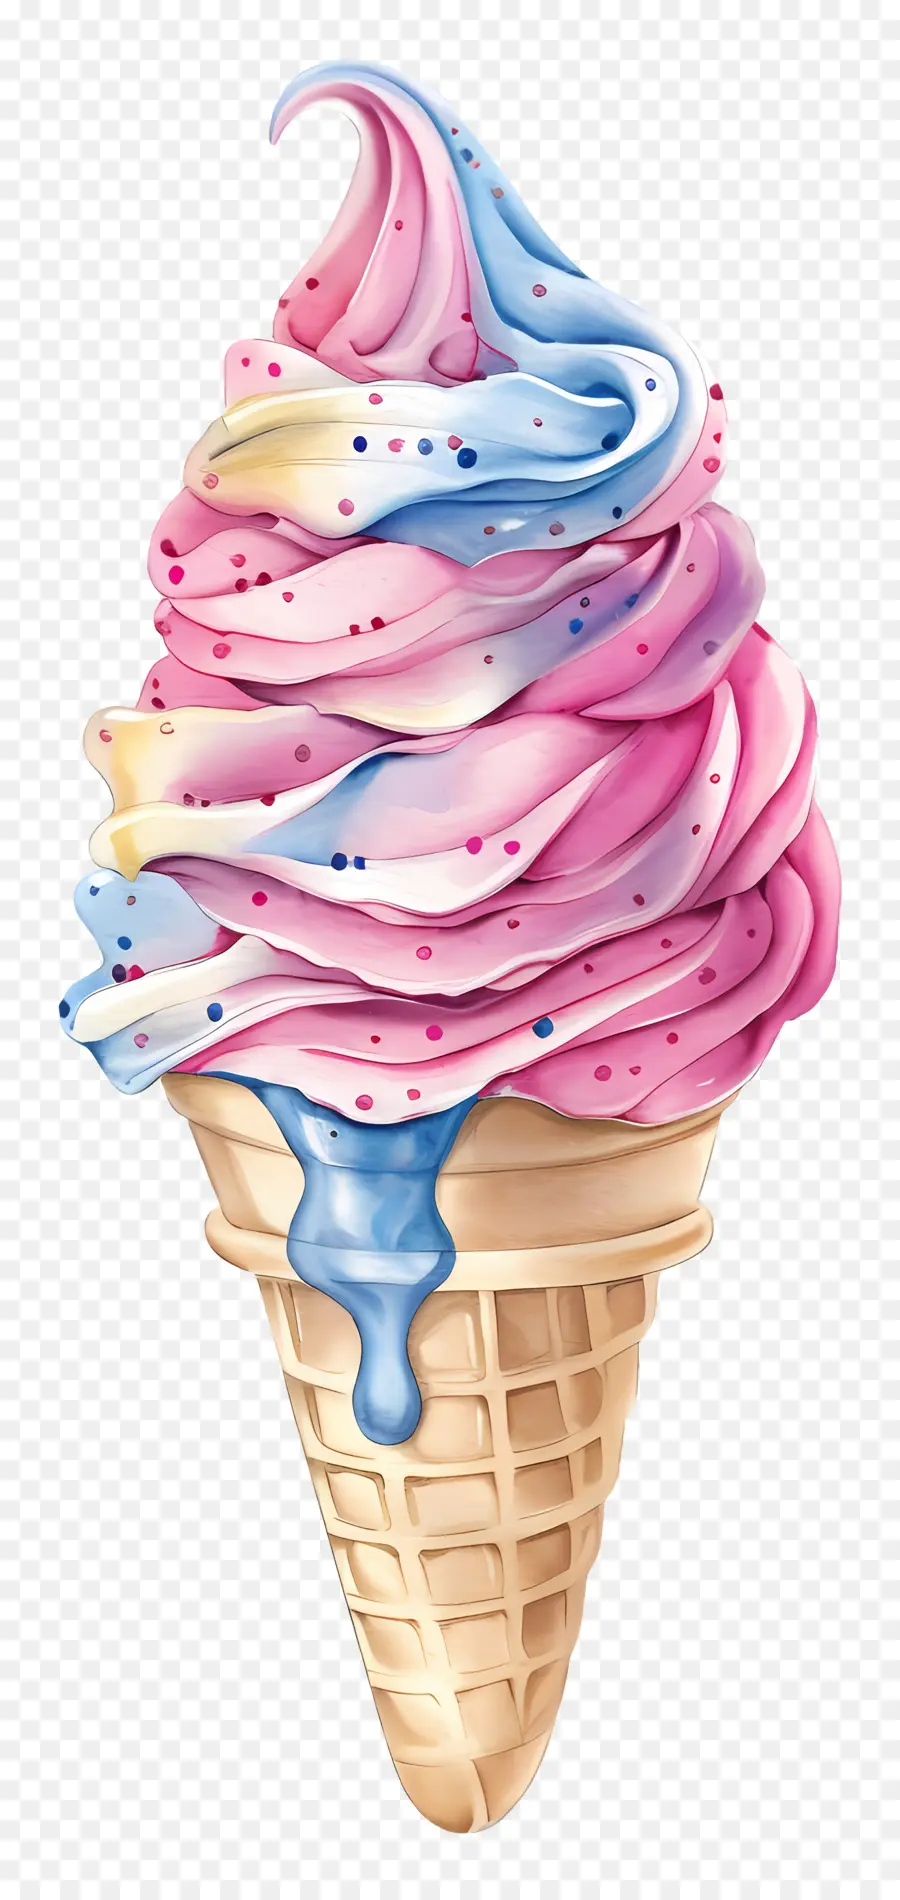 softy ice cream watercolor illustration ice cream cone pink and blue chocolate cone